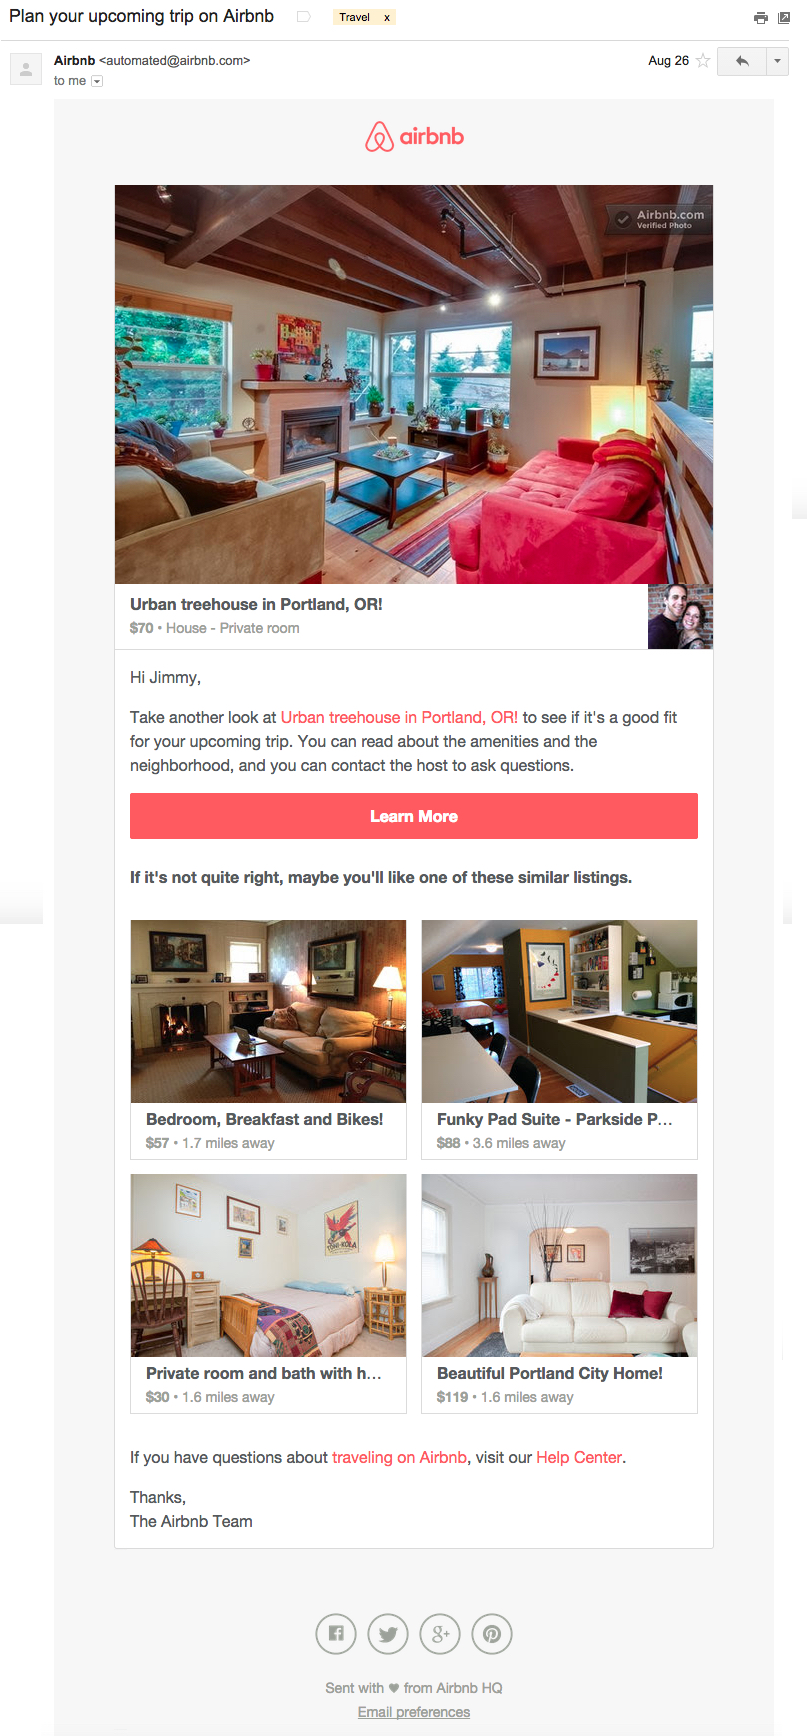 Email marketing from AirBnB